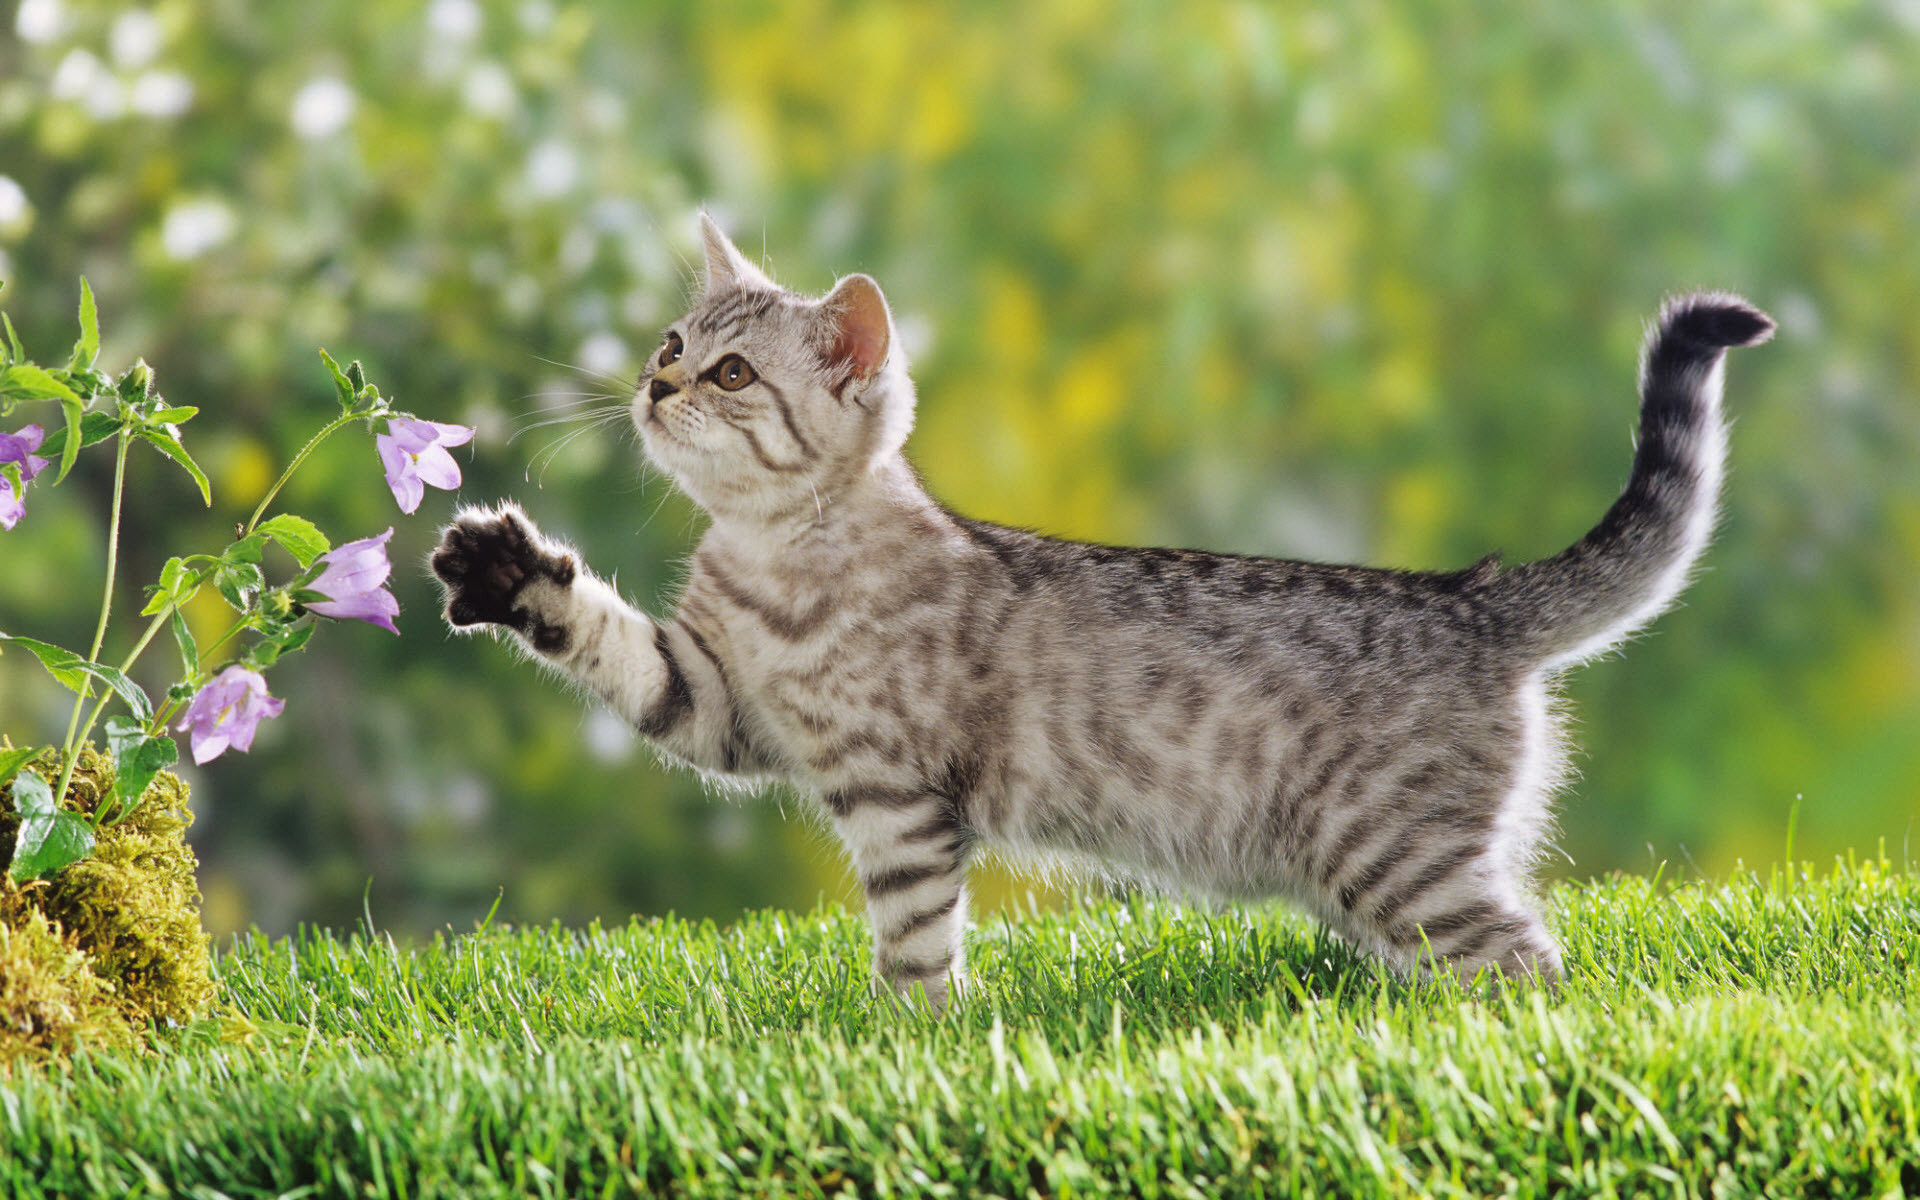 Cute wallpaper cat photo #facts – More info about cat at Catsincare.com